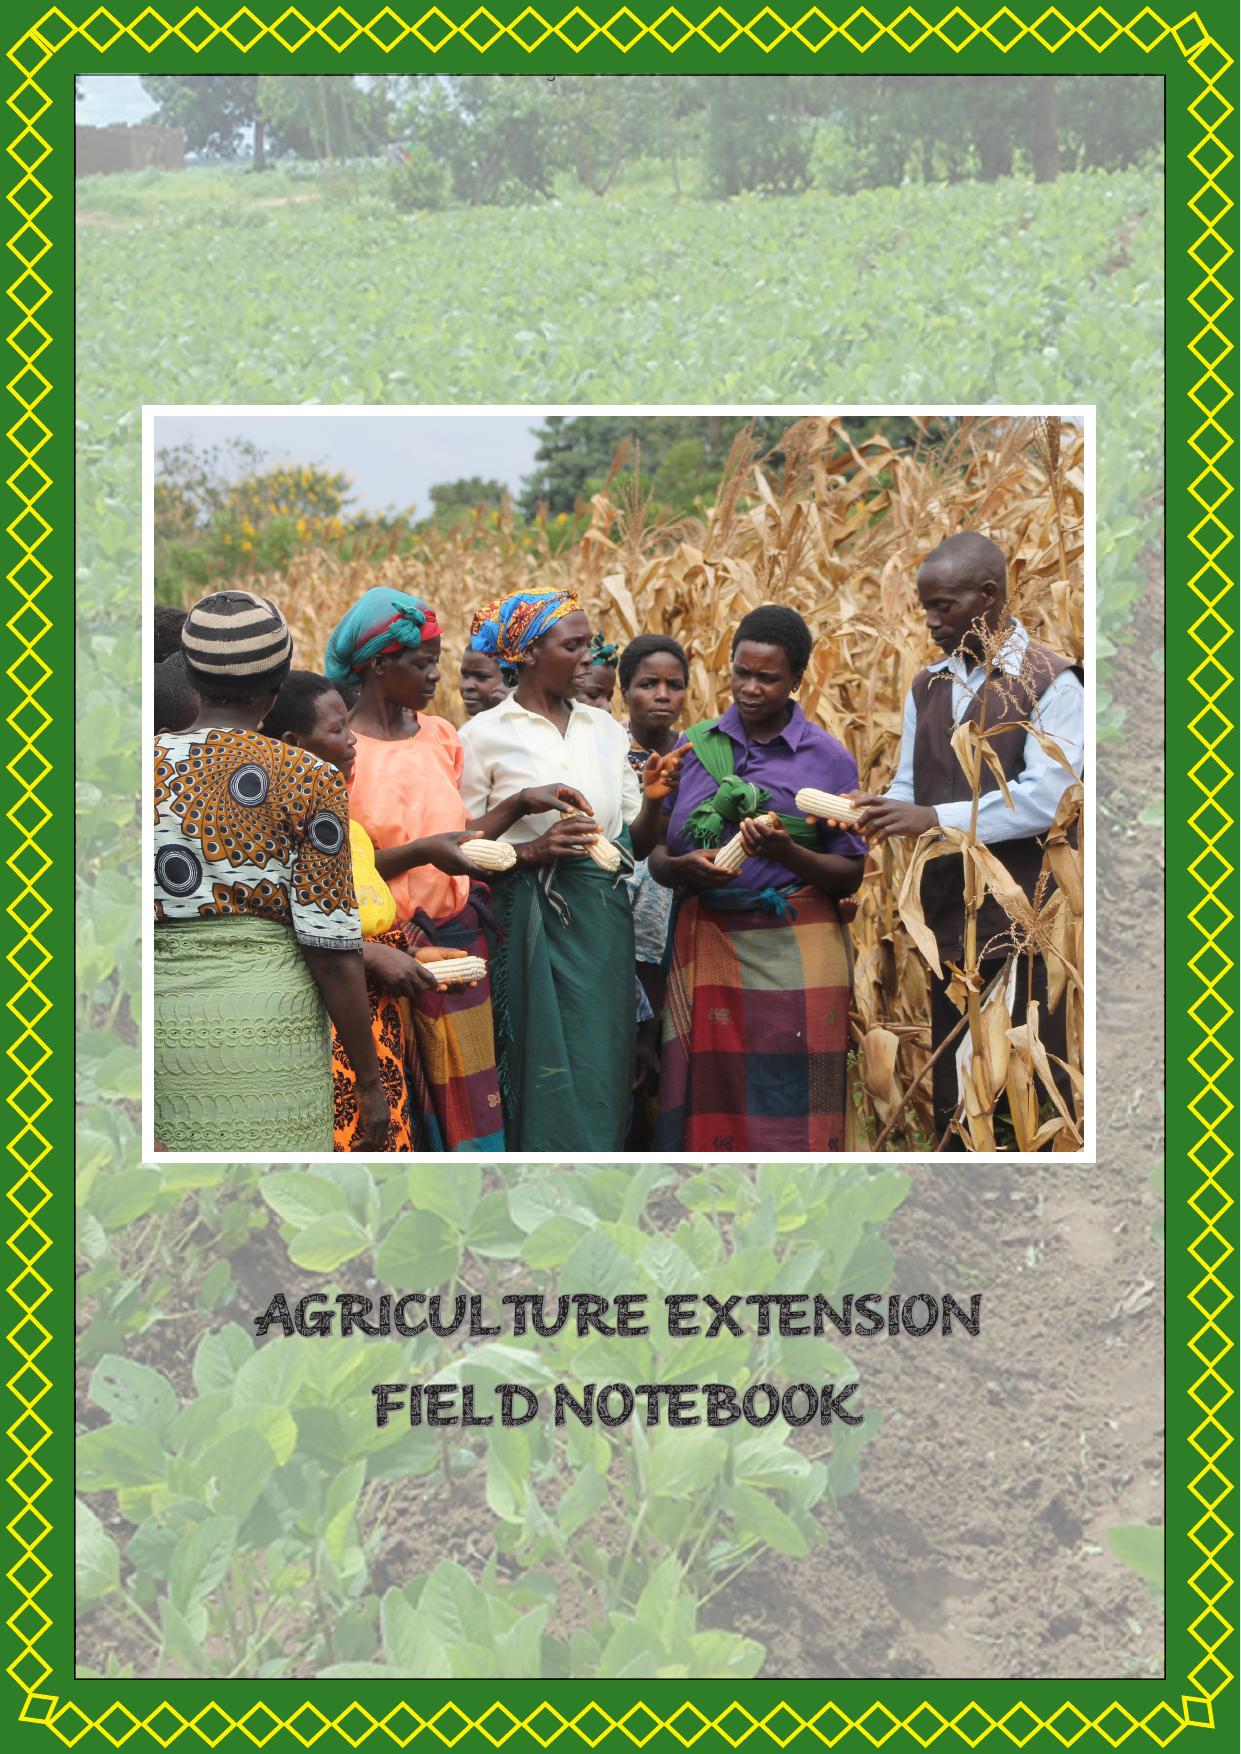 Agriculture Extension Field Notebook 2017